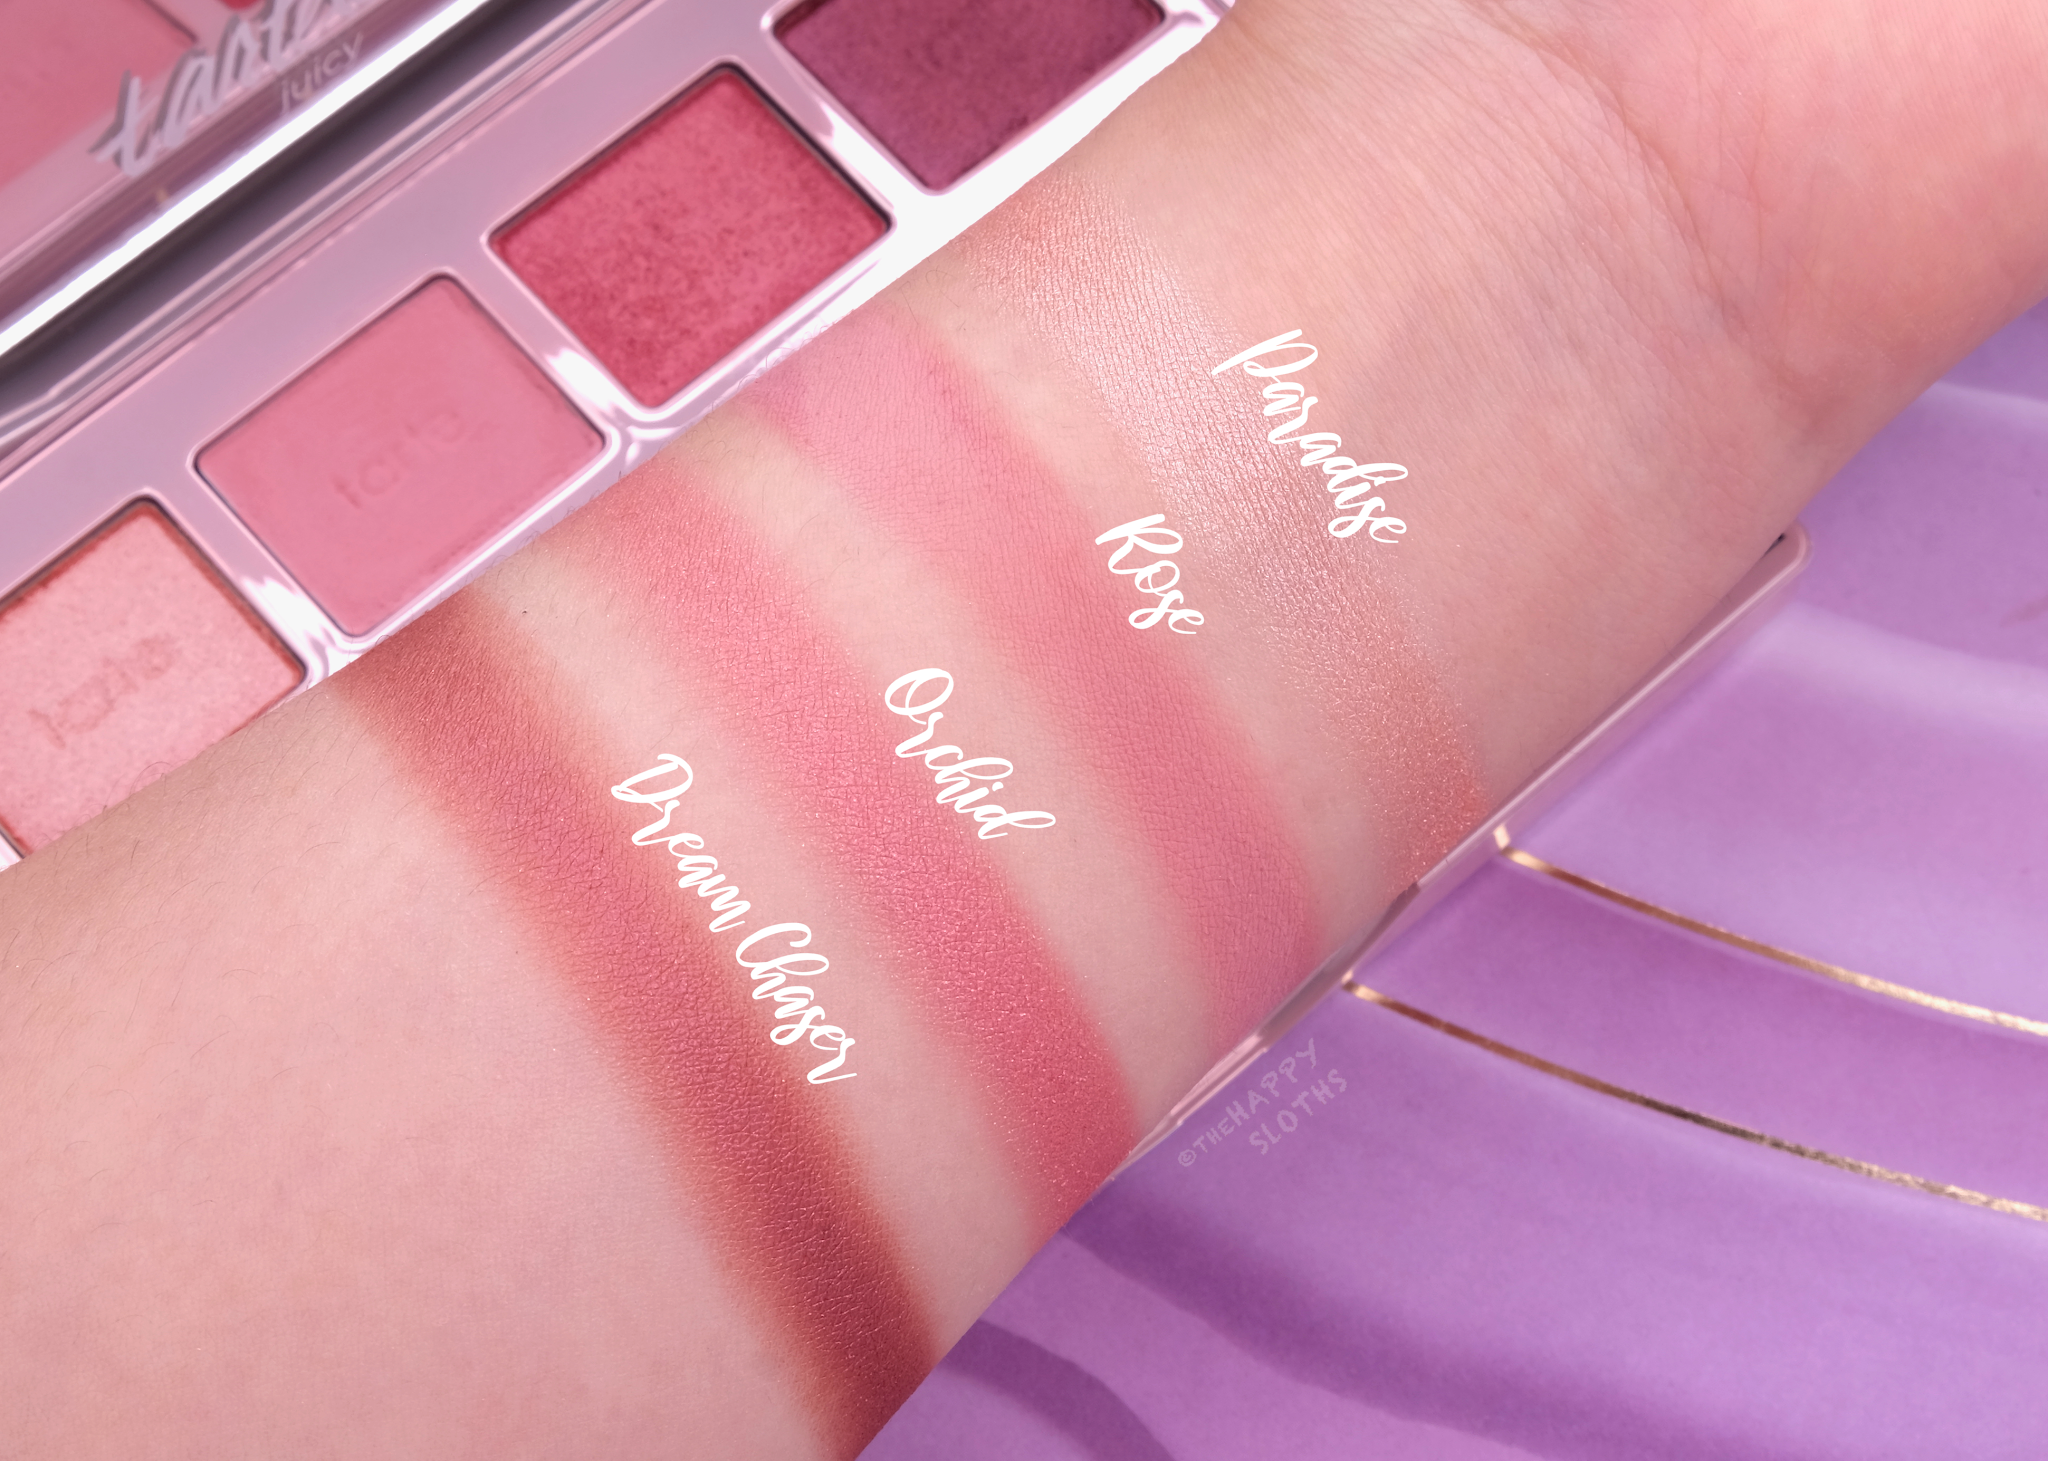 Tarte | Tartelette Juicy Amazonian Clay Palette: Review and Swatches